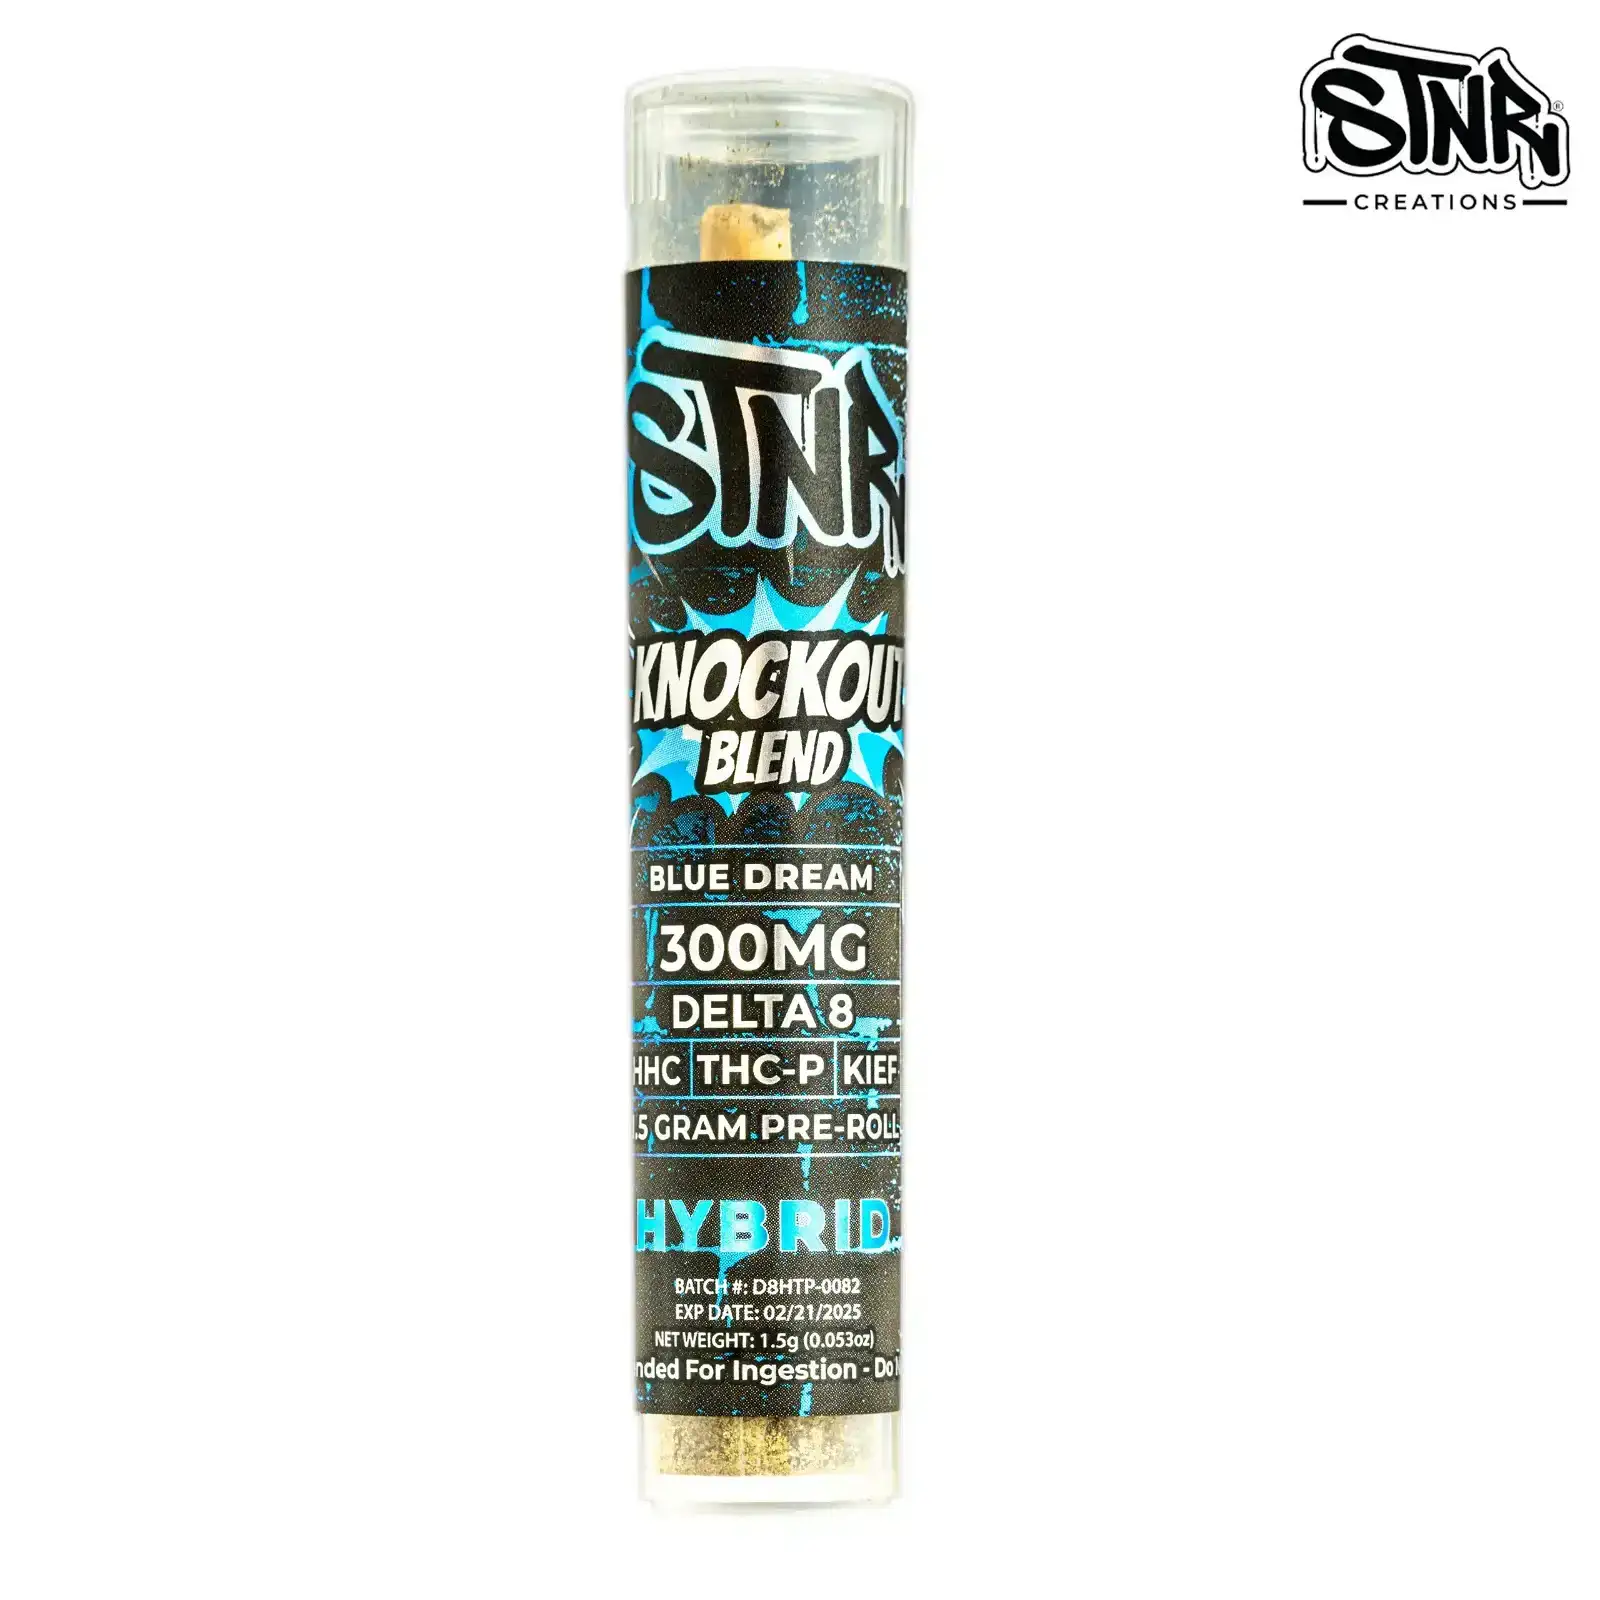 Image of STNR Creations Knockout Blend Pre-Rolls 300mg (1pc) - Cherry Lime Haze